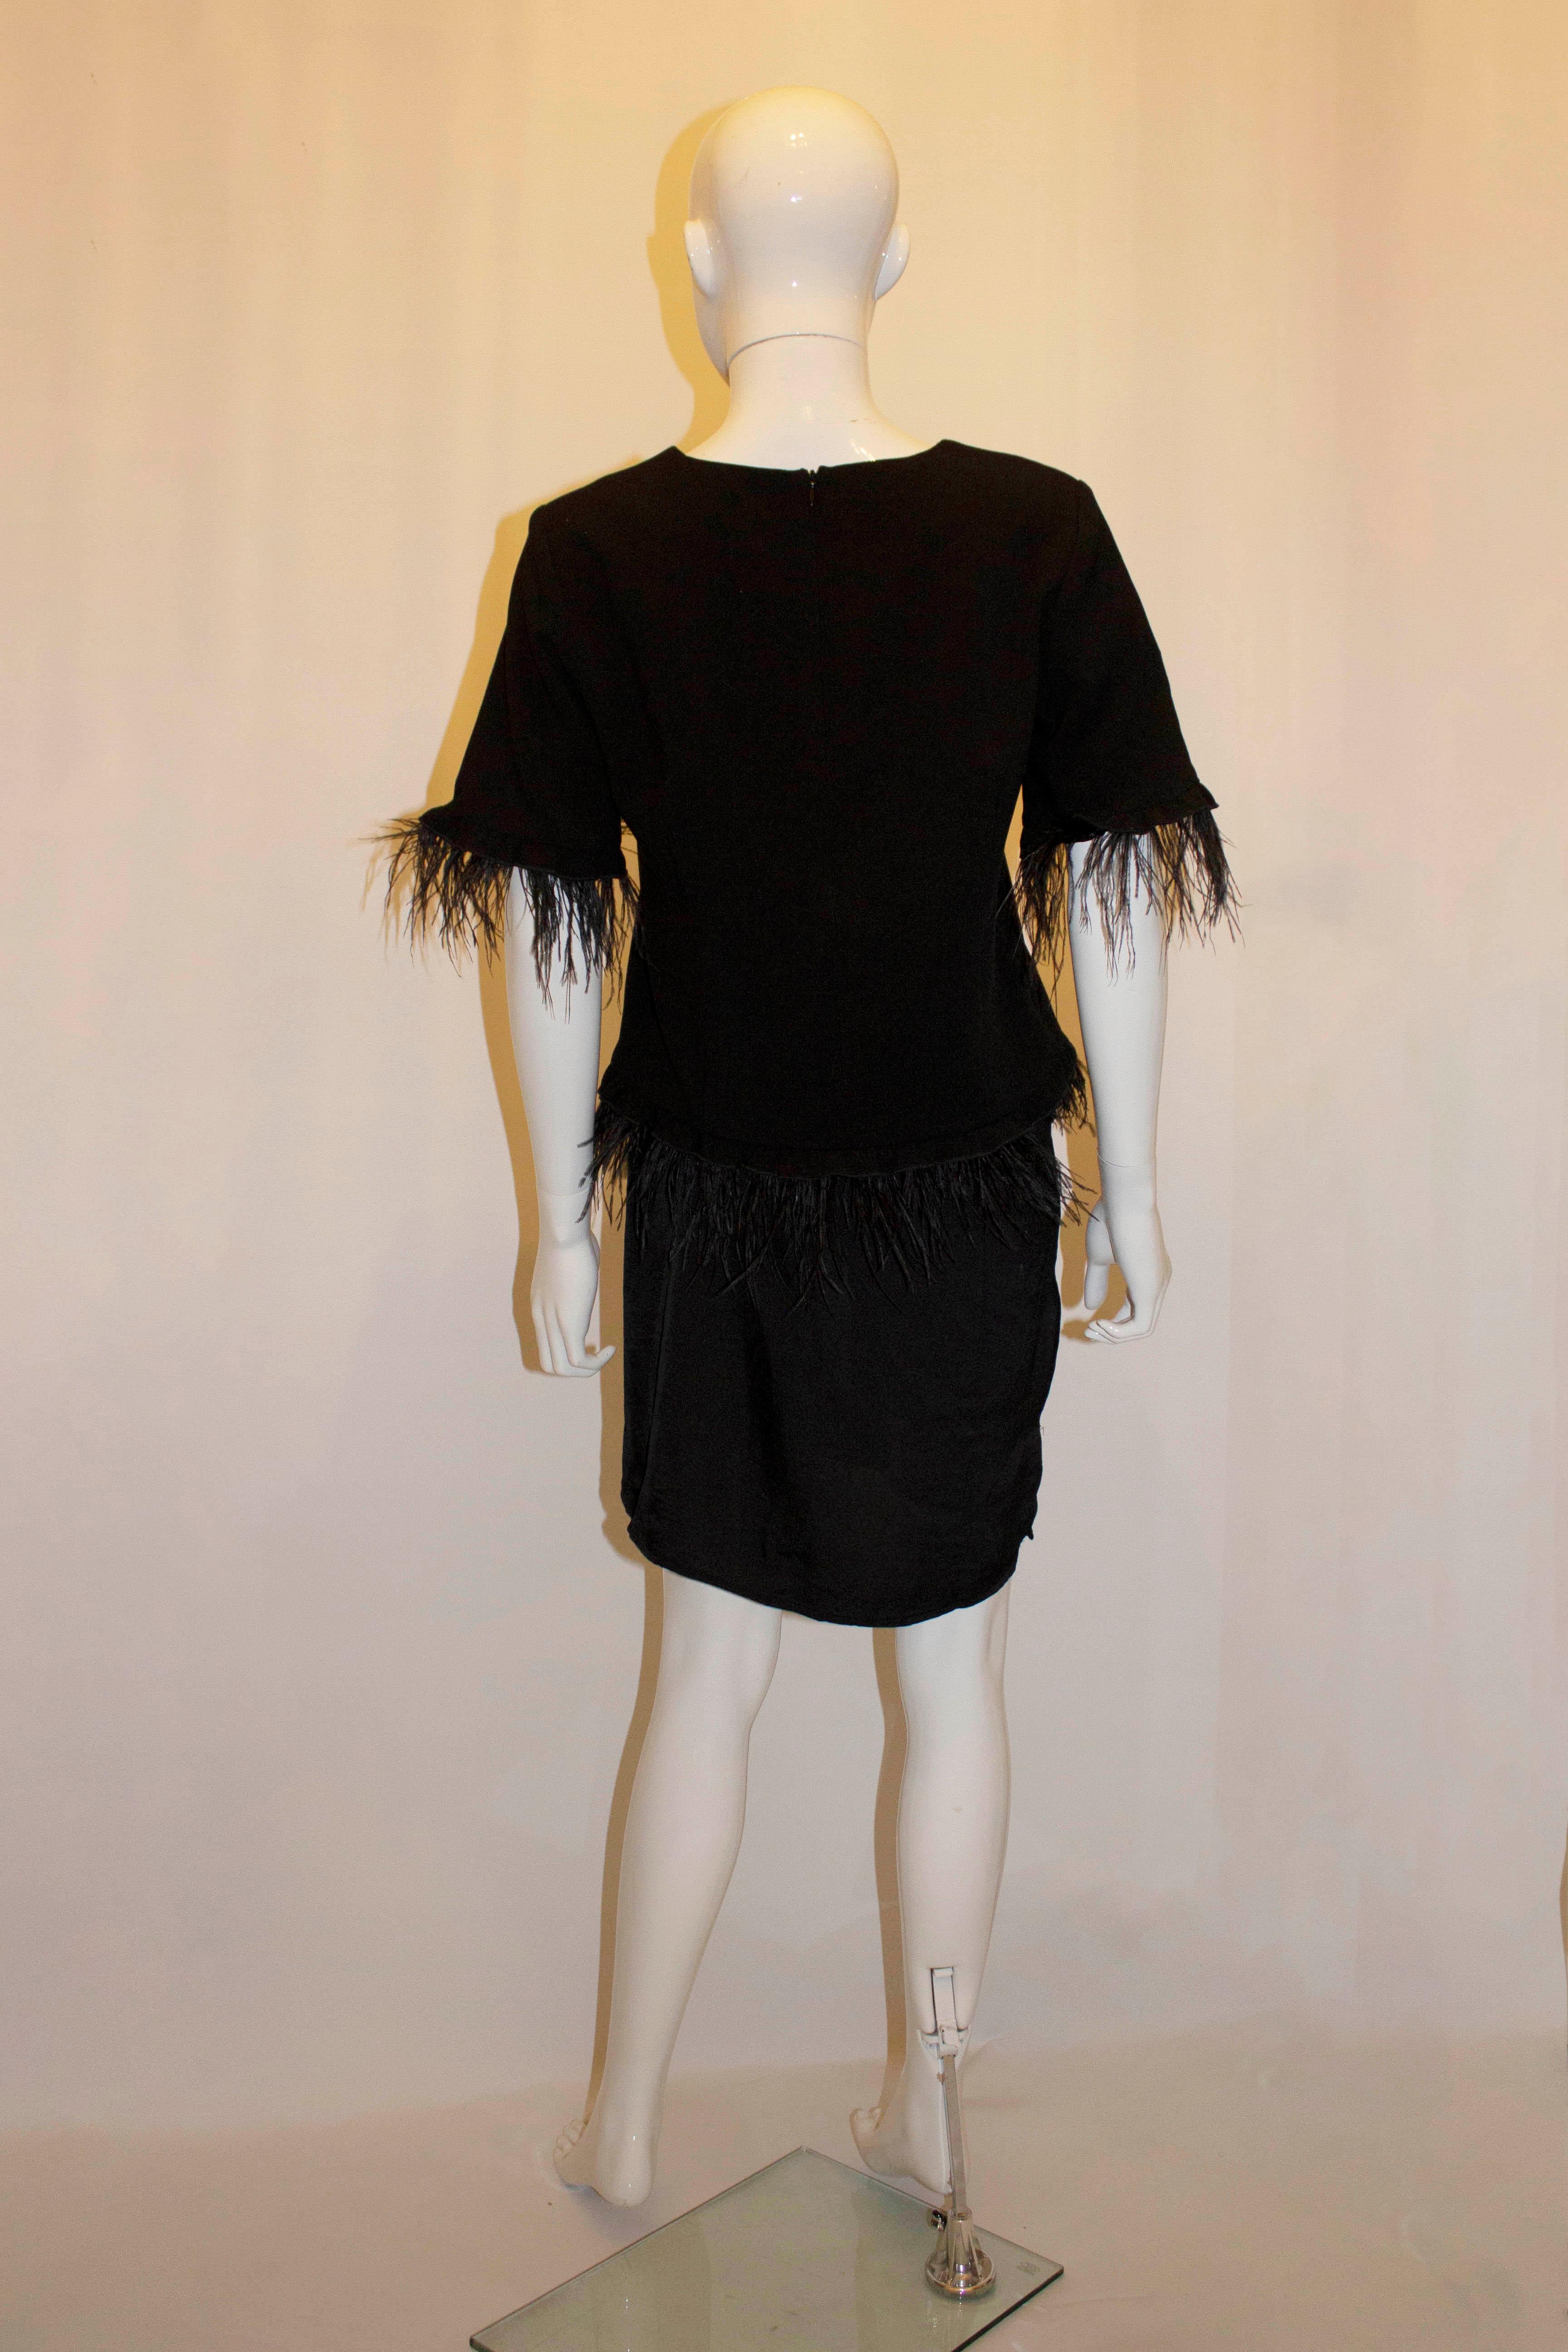 A fun black evening top with feather detail by Spell. The top has a back zip opening, elbow length sleaves , and is lined. Measurements  Size UK10 Bust up to 38'', length including feathers 24''